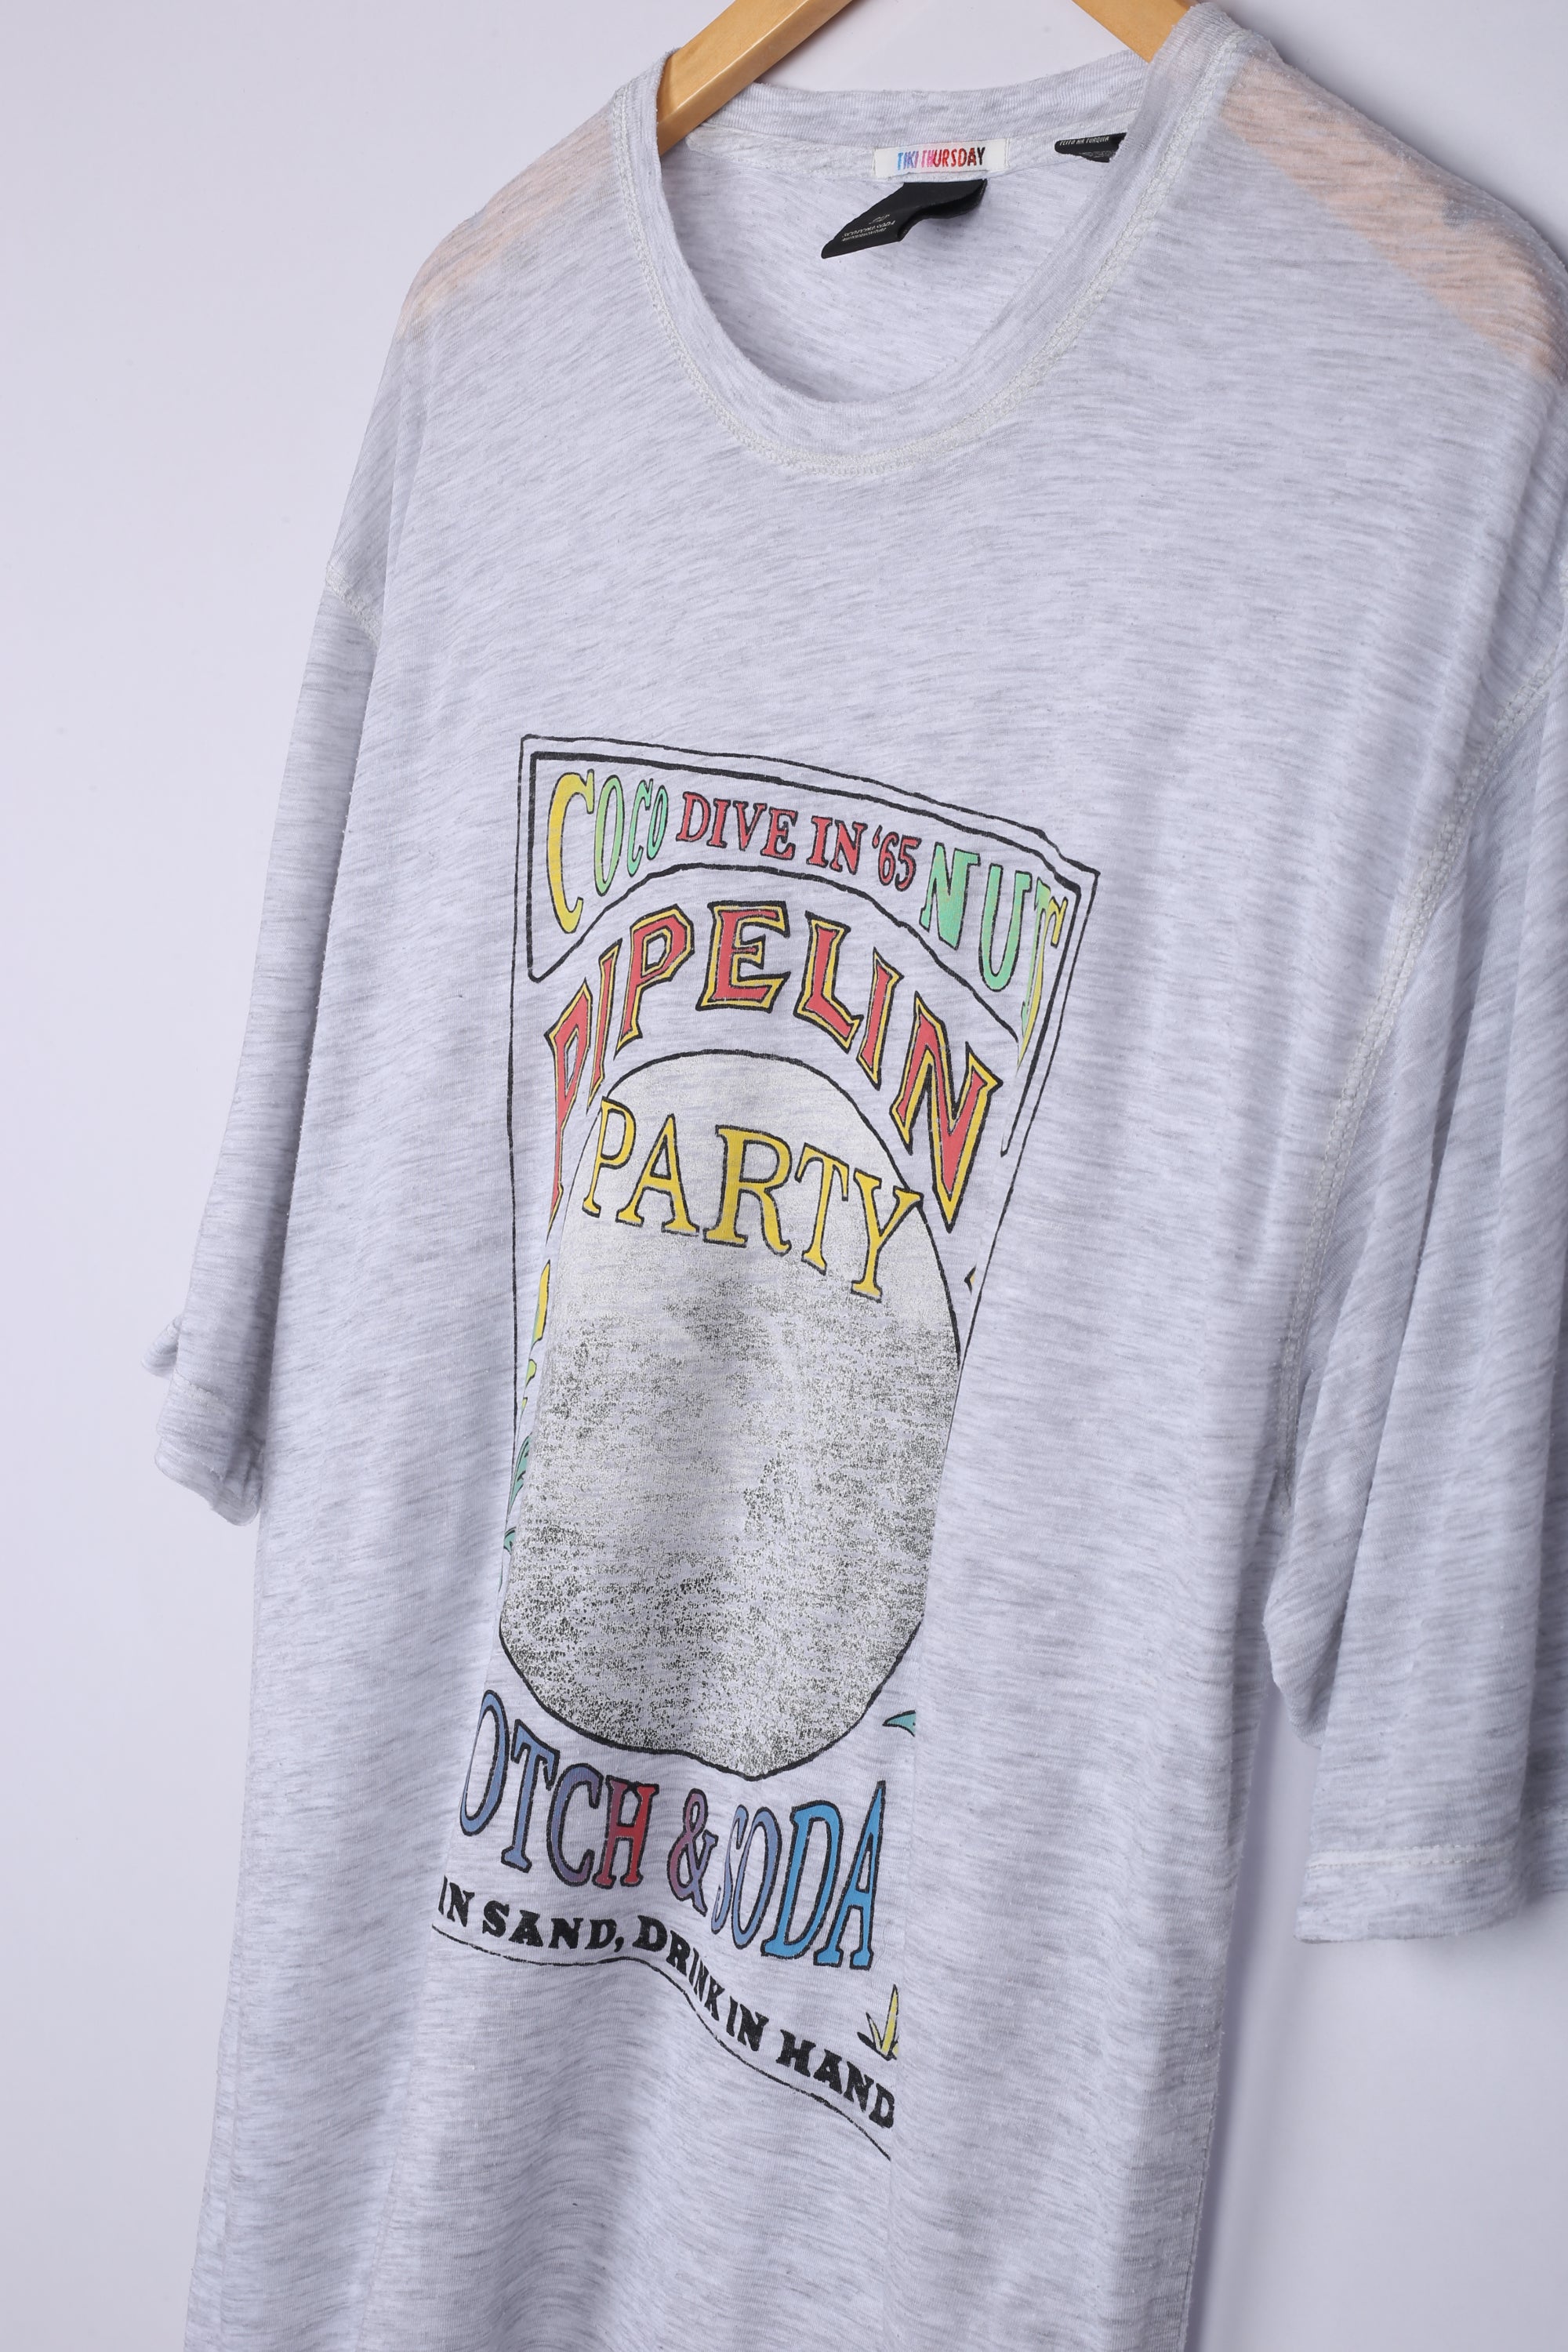 Vintage 90's Scotch and Soda Graphic Tee Grey